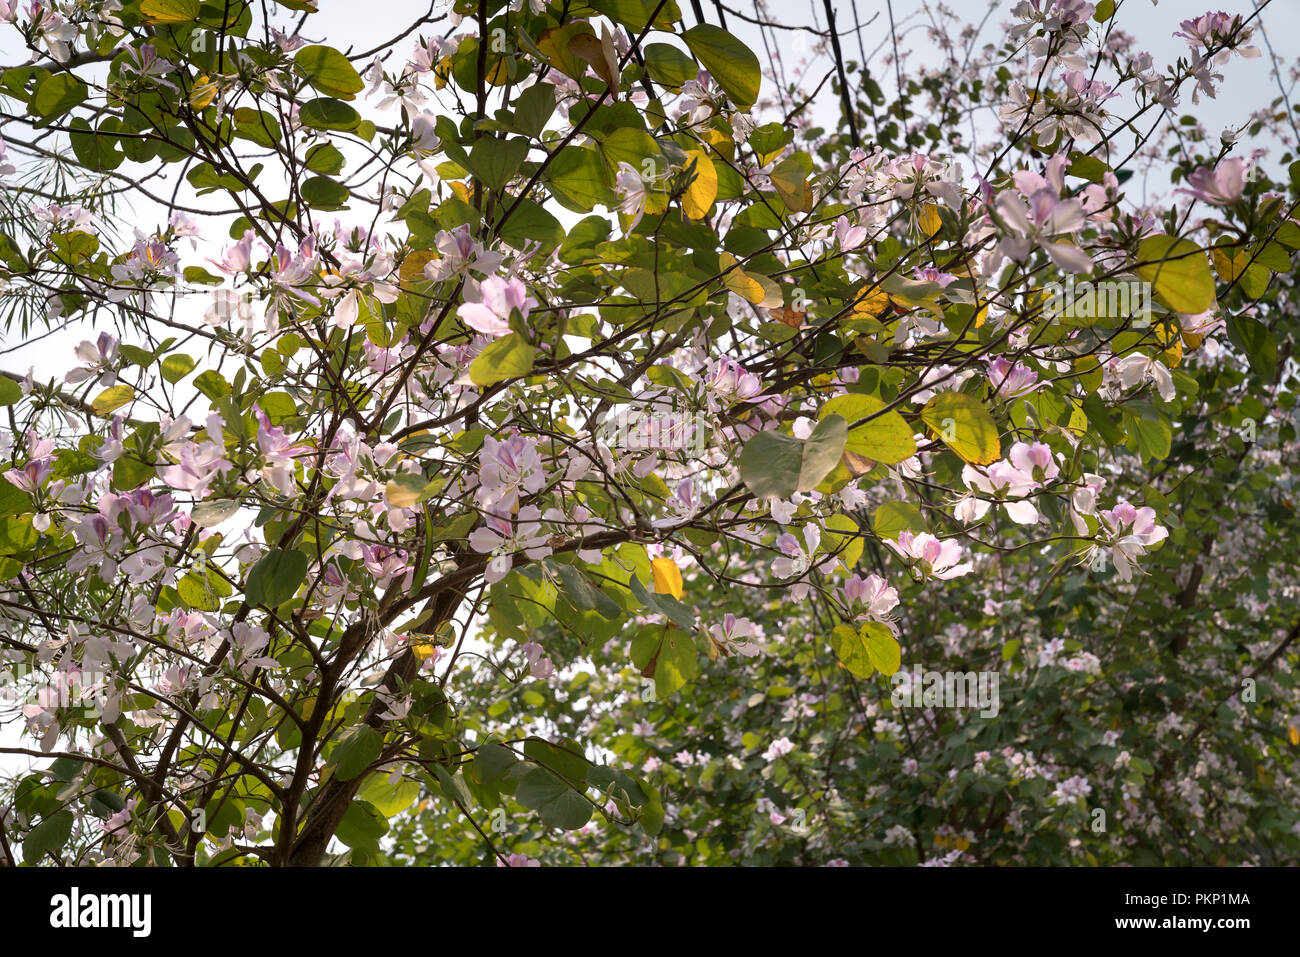 Bauhinia variegata flowers blooming, in full bloom in the mountainous area in the northwest of Vietnam Stock Photo